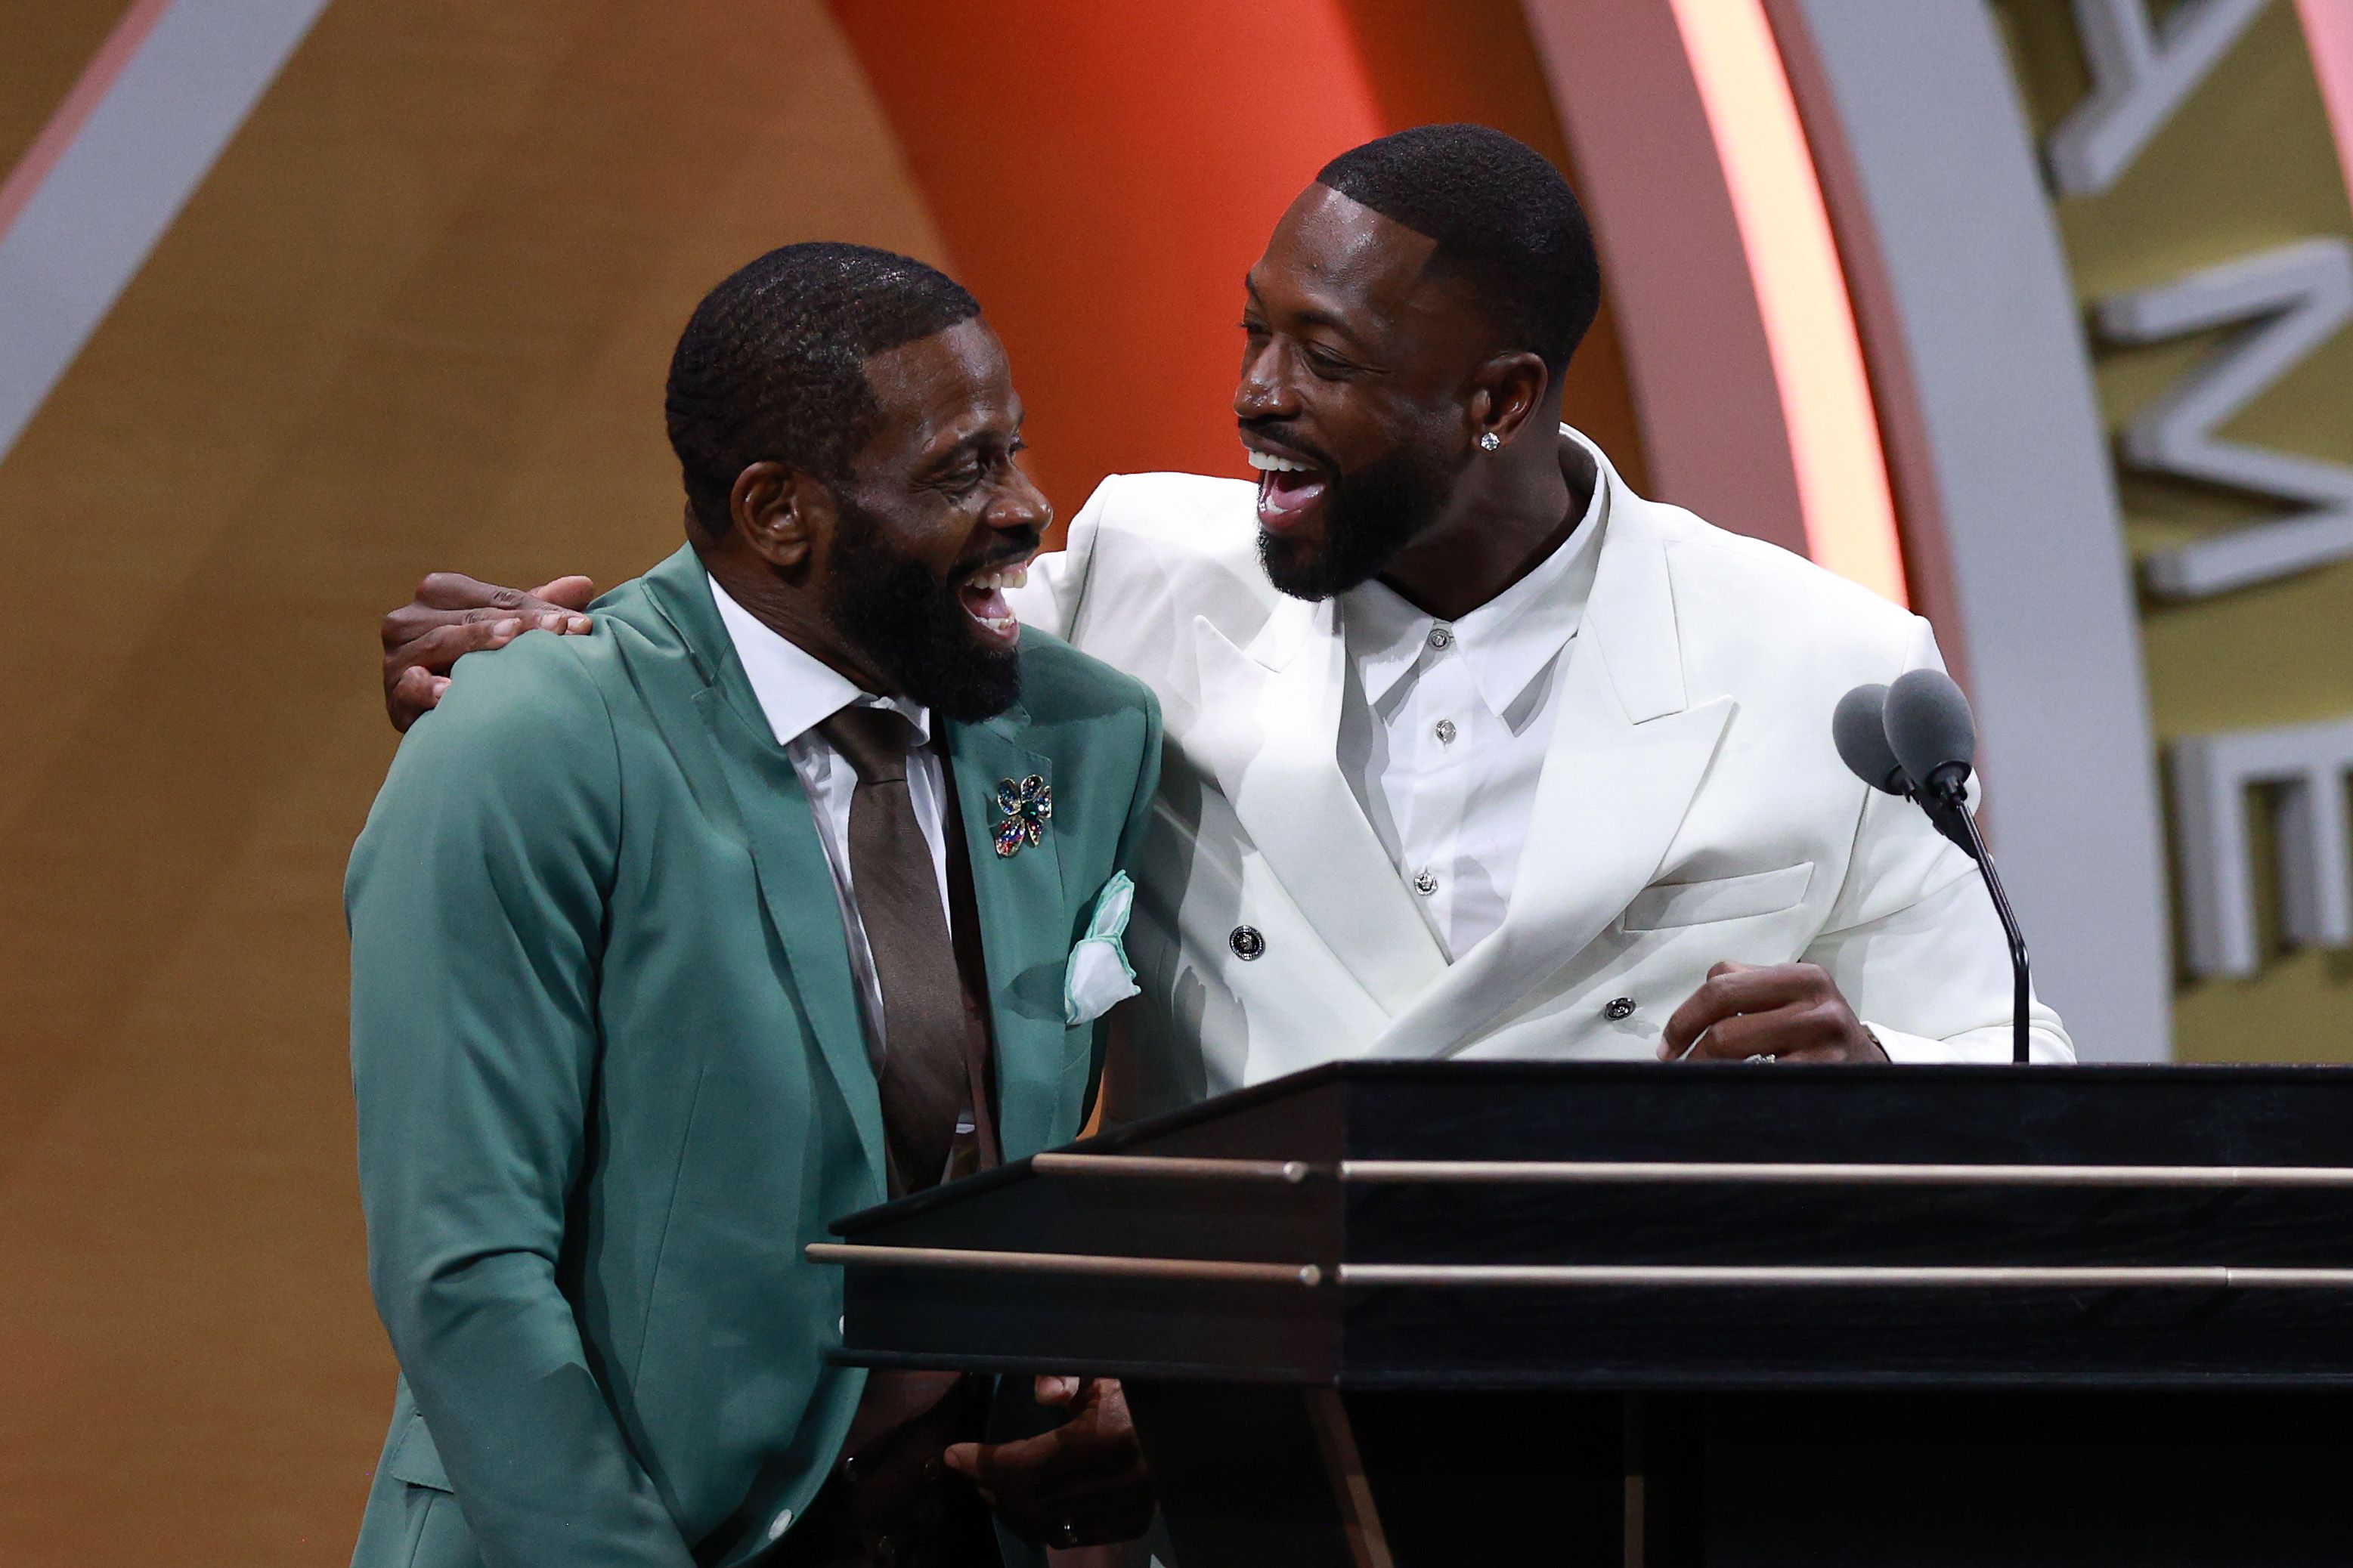 Dwyane Wade Toasts Gabrielle Union, Kids During Hall of Fame Induction